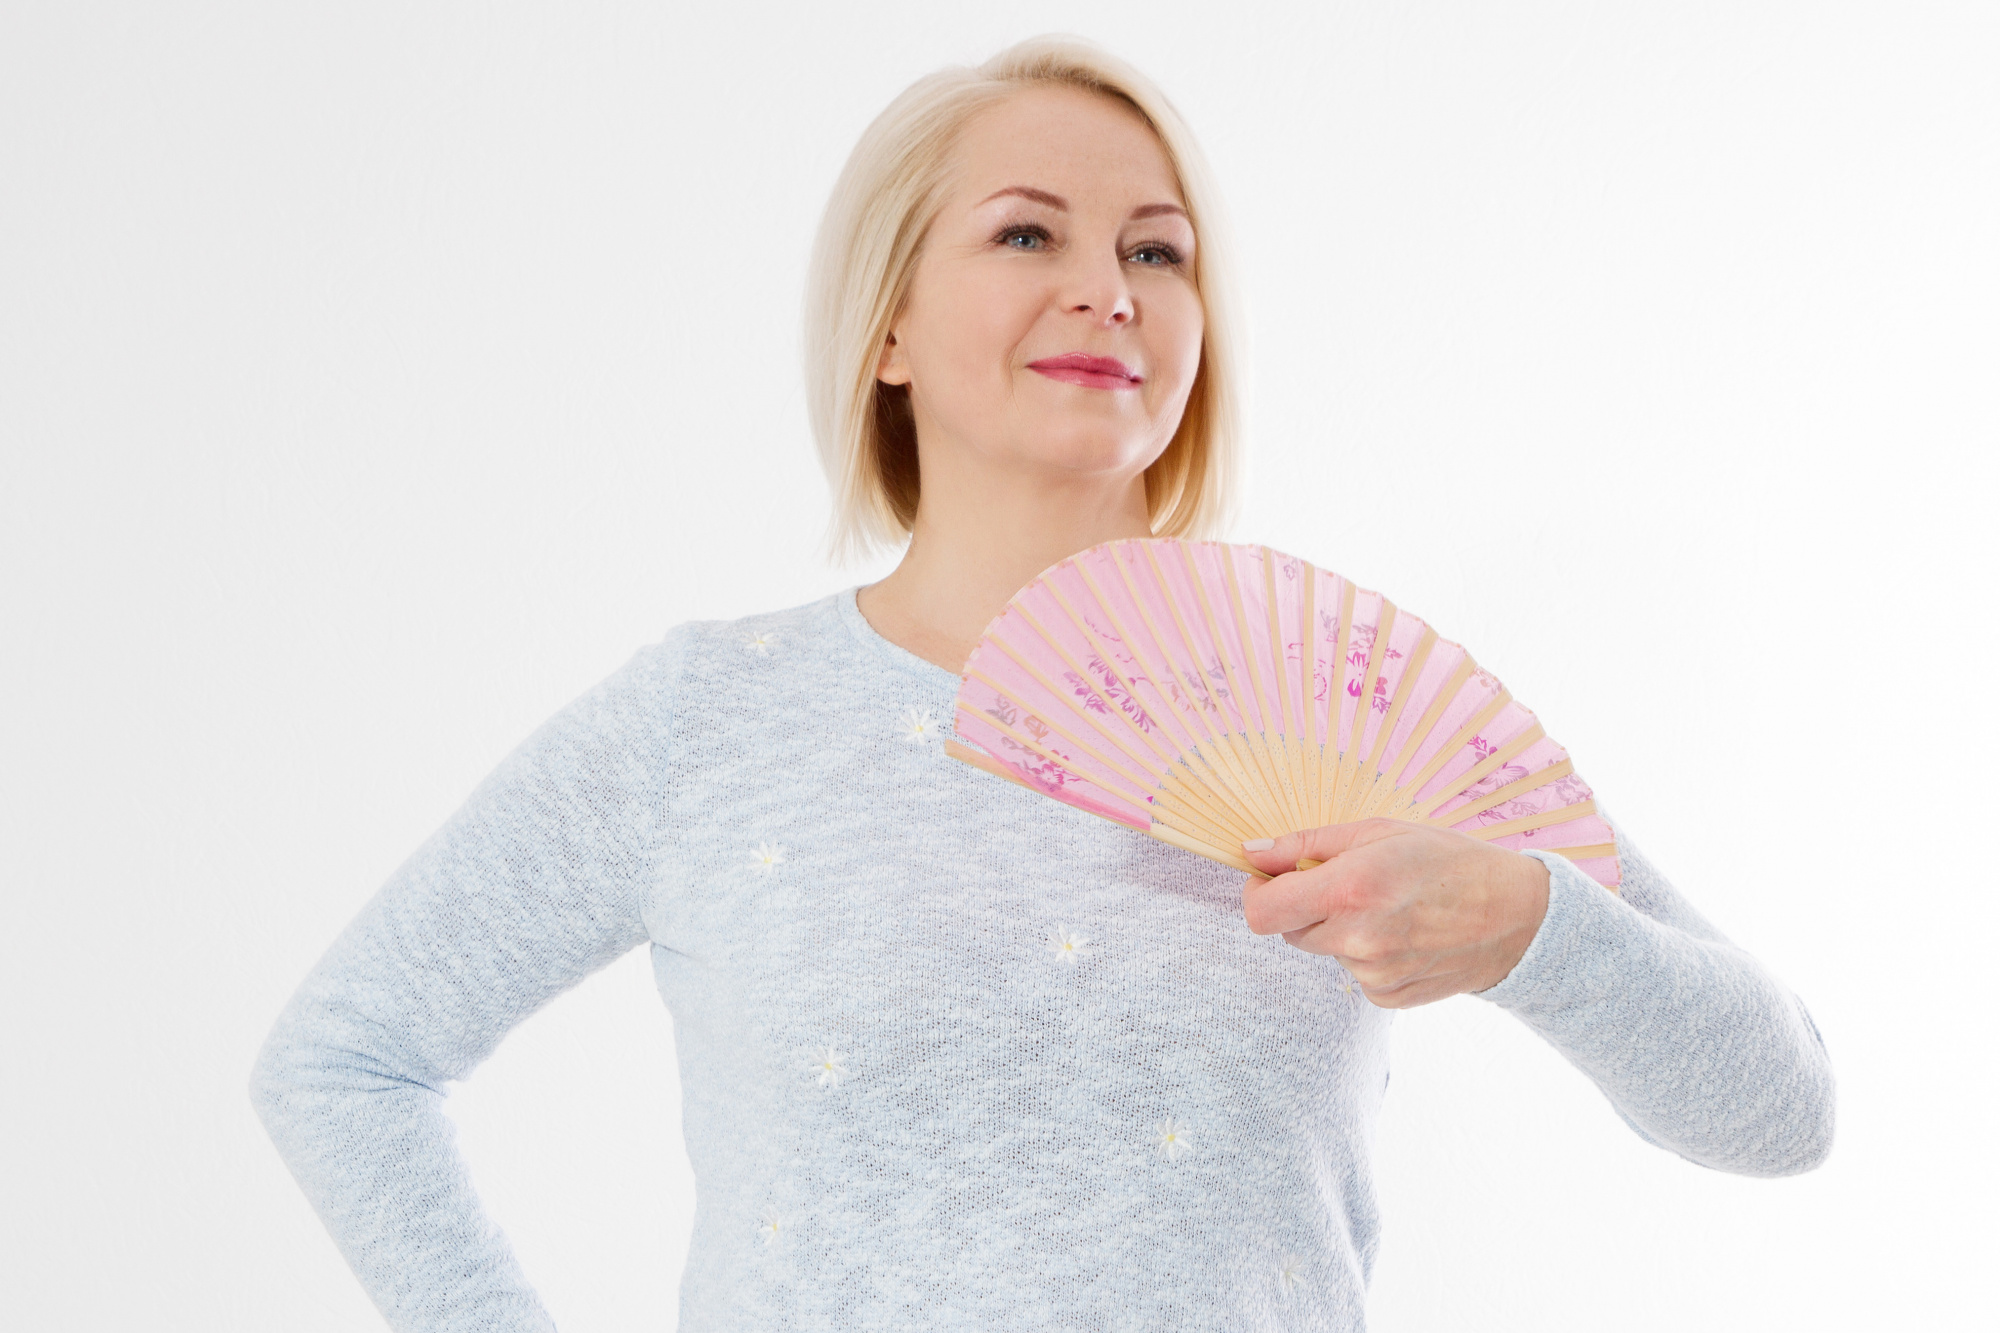 Makeup for Hot Flashes, happy middle aged woman with menopause holding a fan